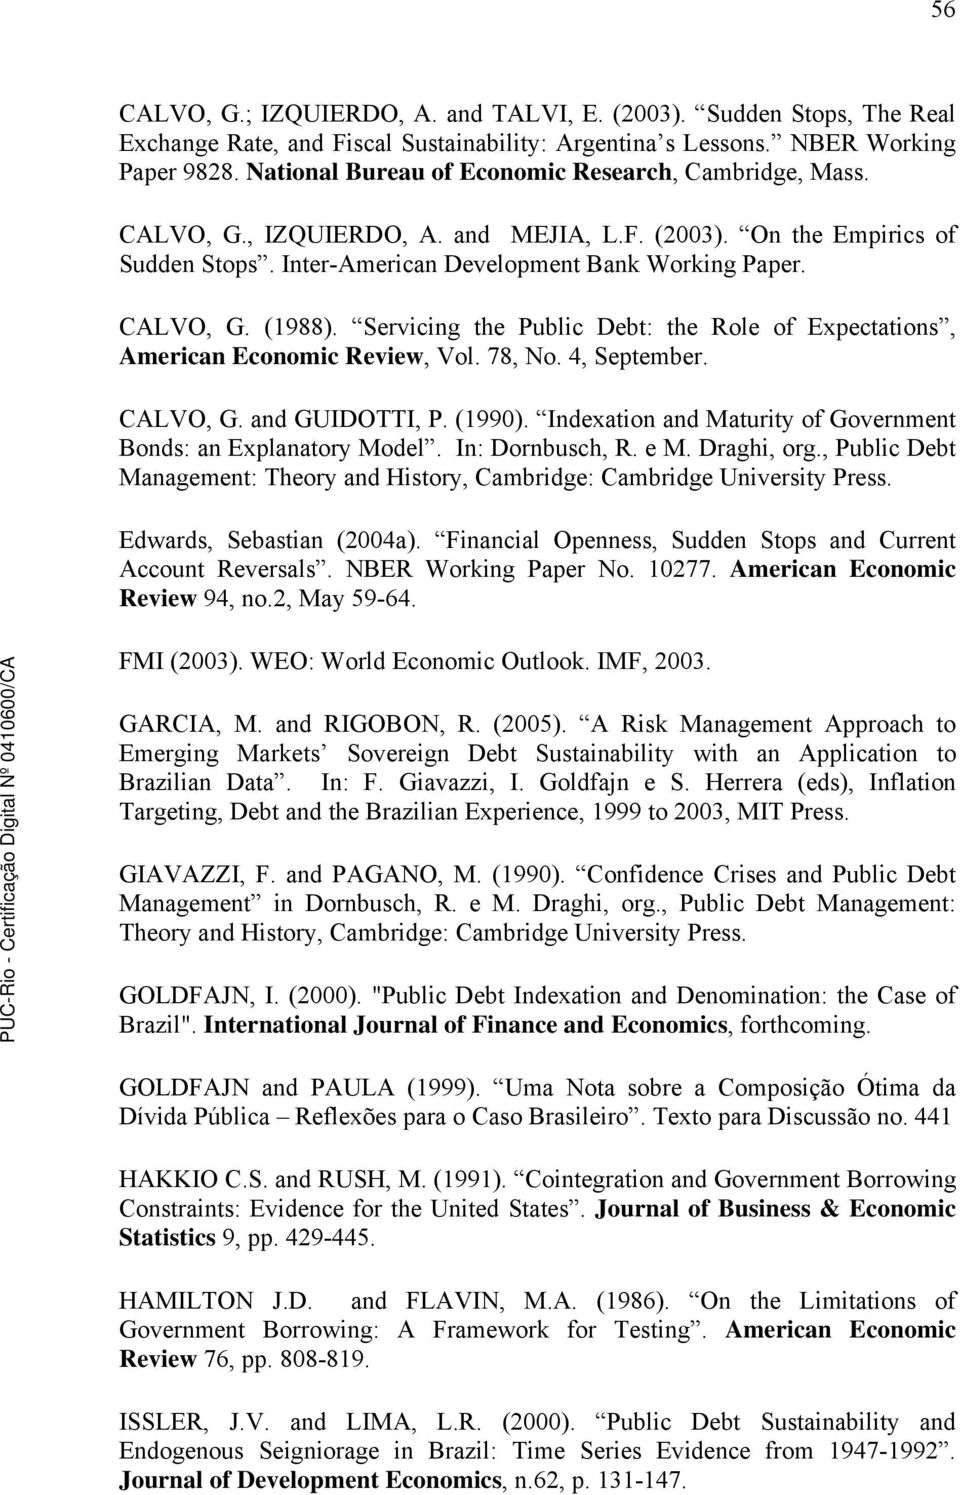 Servicing he Public Deb: he Role of Expecaions, American Economic Review, Vol. 78, No. 4, Sepember. CALVO, G. and GUIDOTTI, P. (1990). Indexaion and Mauriy of Governmen Bonds: an Explanaory Model.